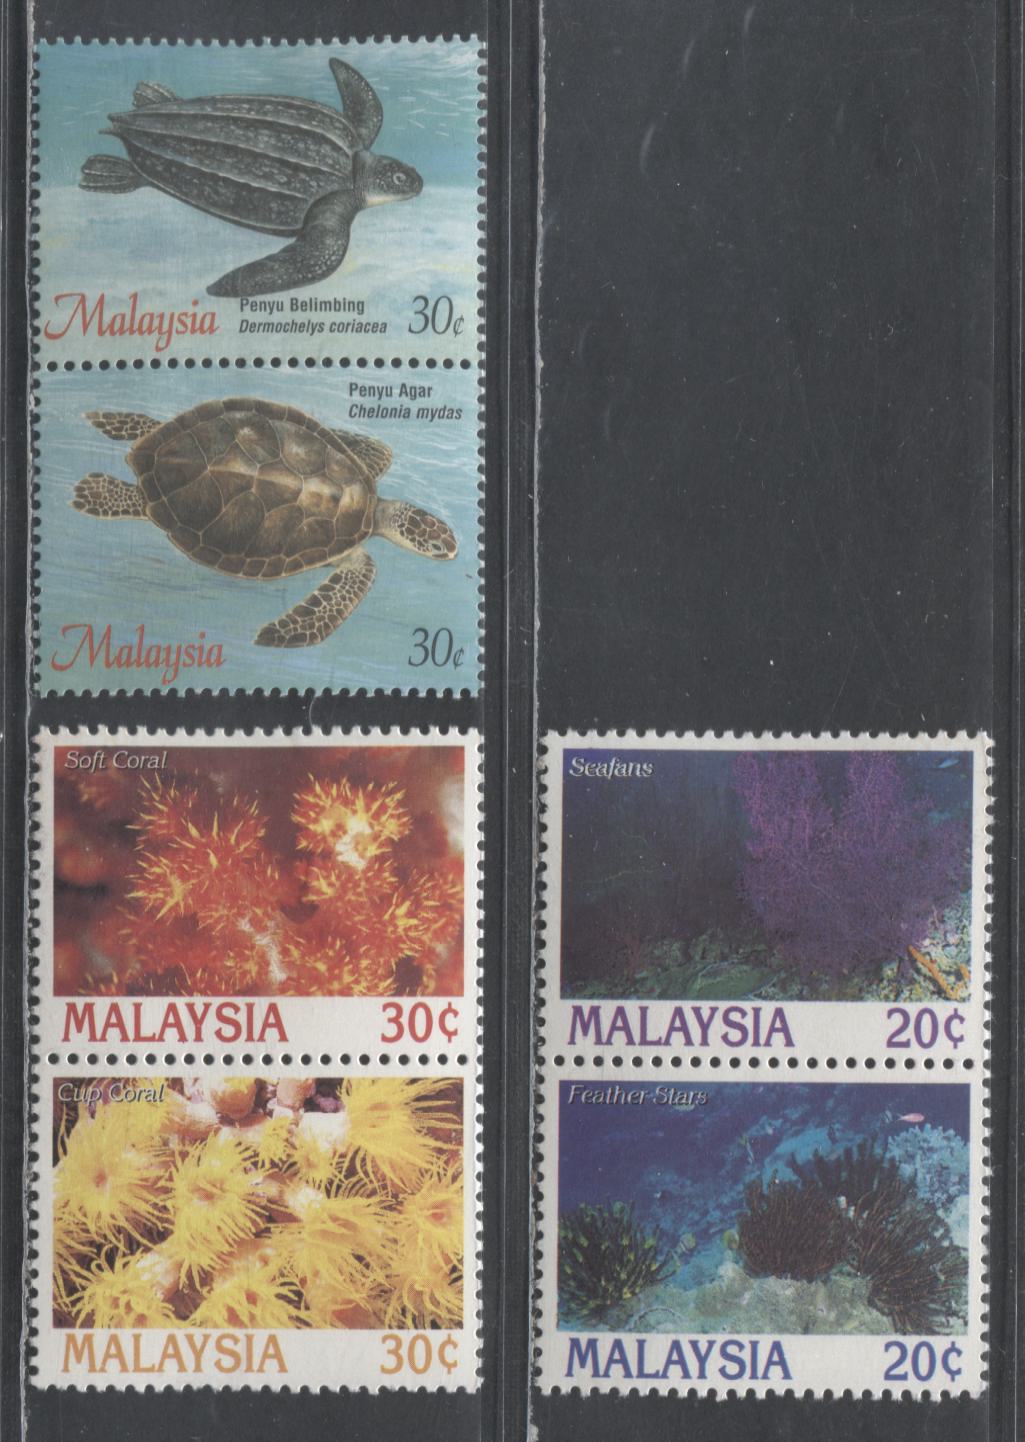 Lot 63 Malaysia SC#543a/563 1995 Marine Life & Turtles Issues, Top Stamp Hinged, Bottom Stamp NH, 3 VFOG/NH Pairs, Click on Listing to See ALL Pictures, 2017 Scott Cat. $9.65